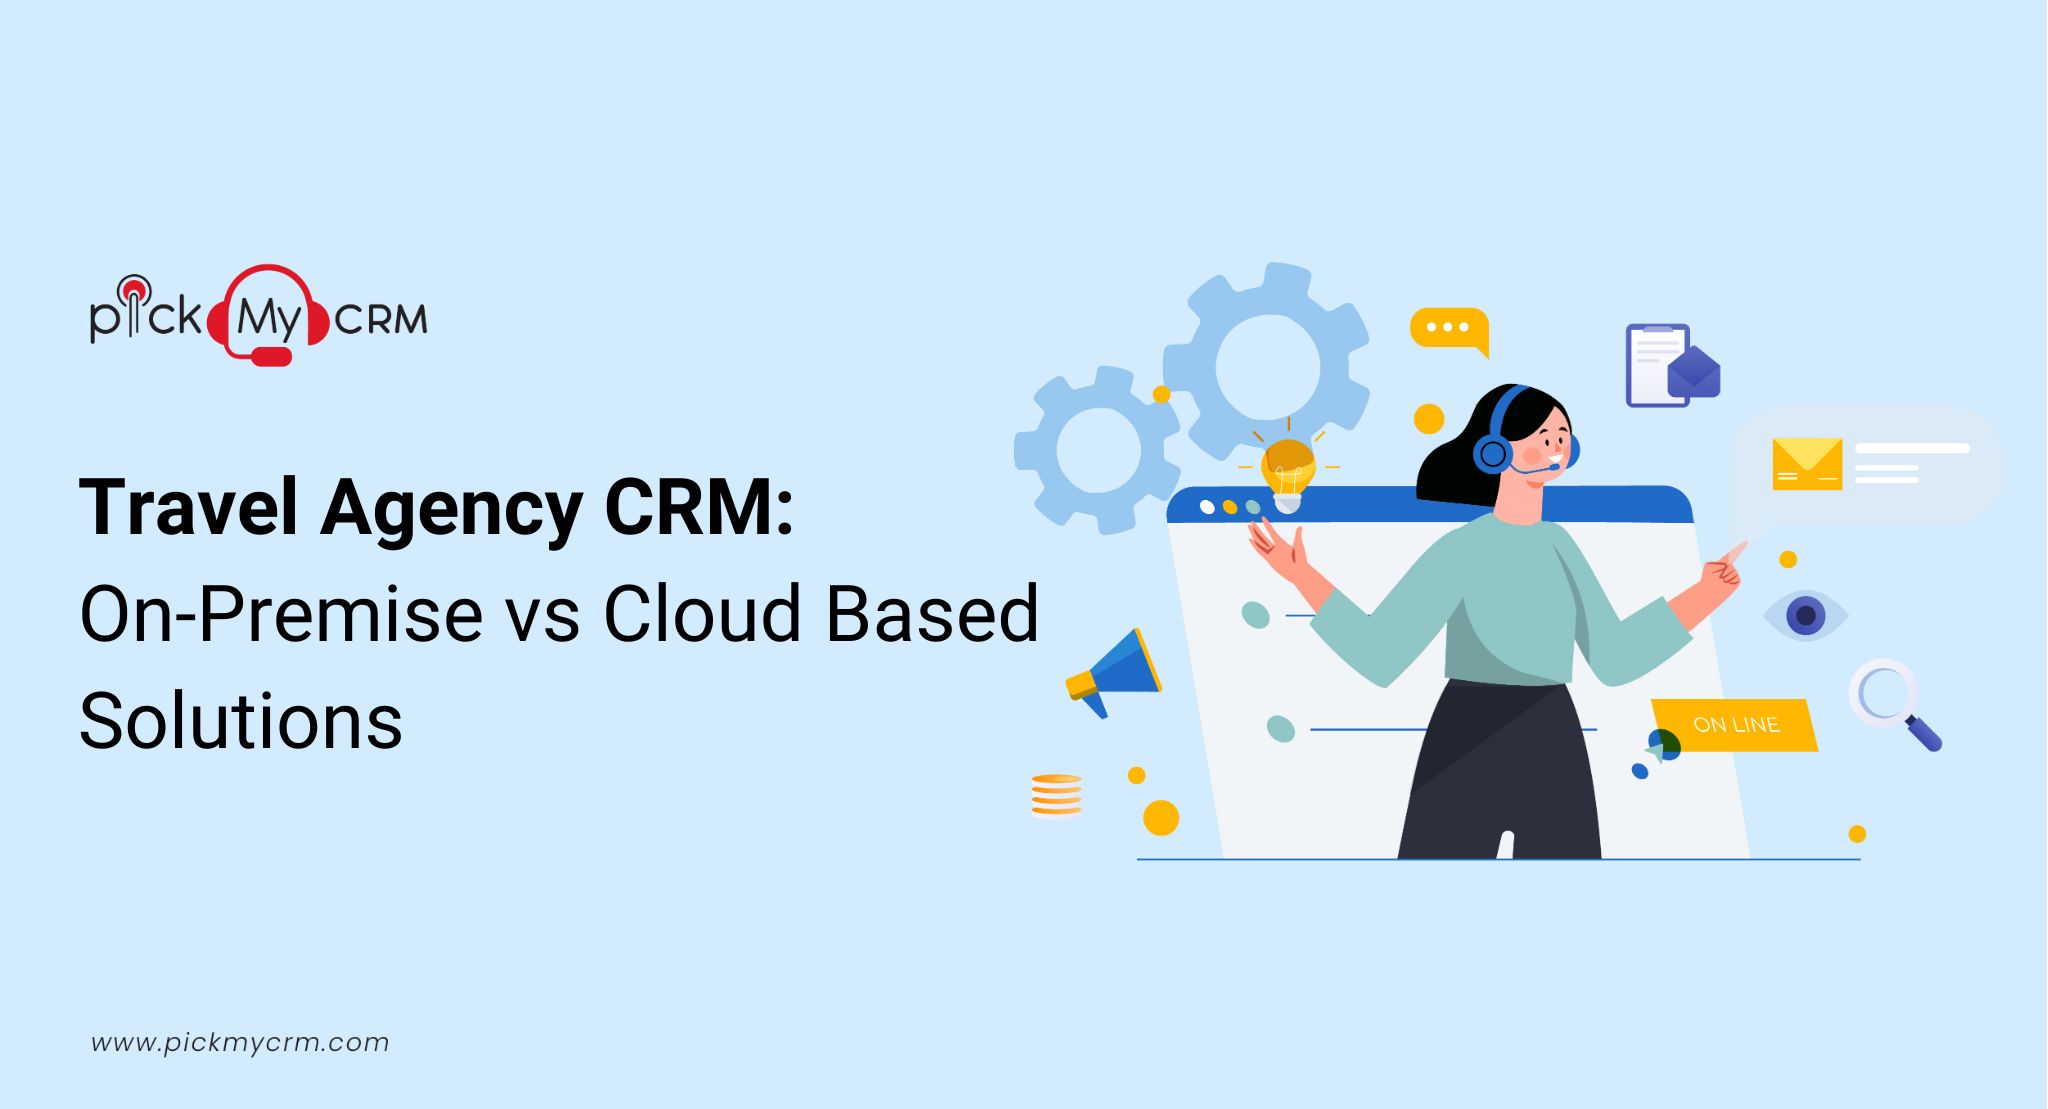 Travel Agency CRM: On-Premise vs. Cloud-Based Solutions